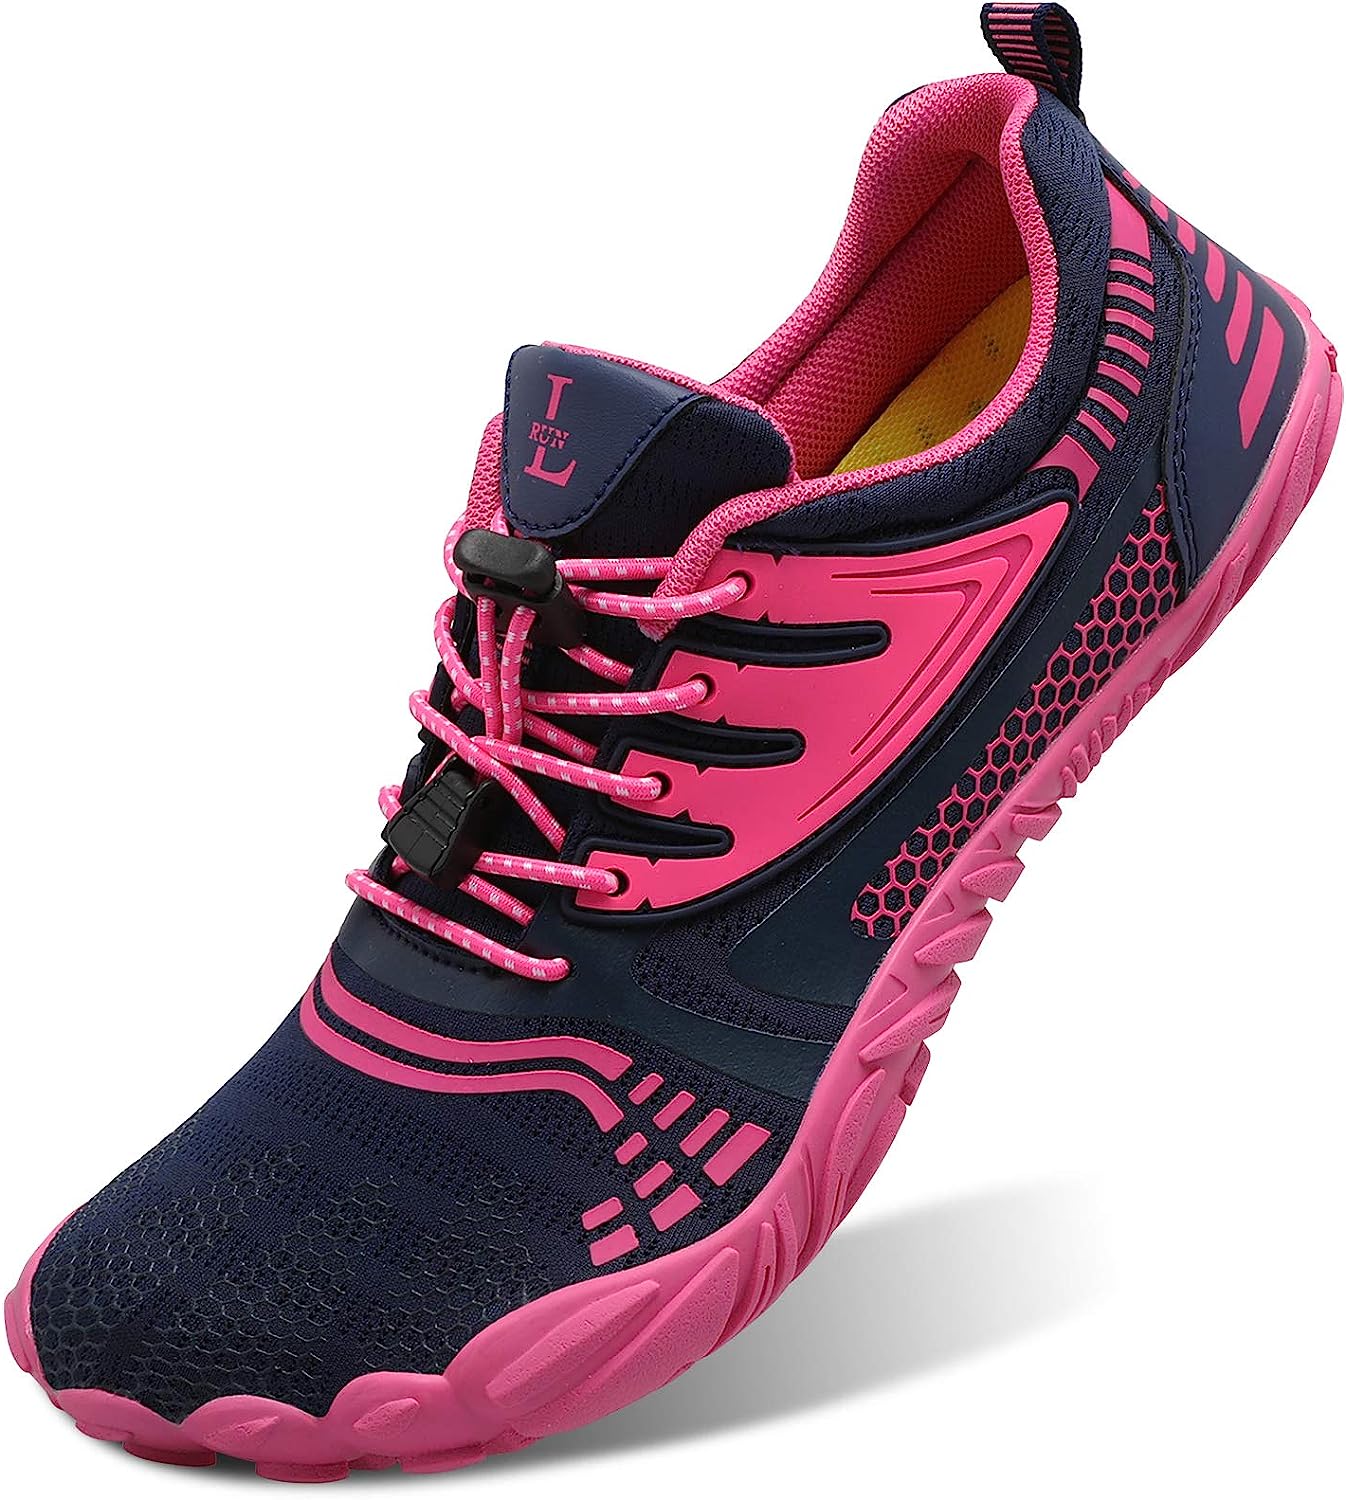 L-RUN Athletic Water Hiking Shoes Beach Sports Shoes [...]